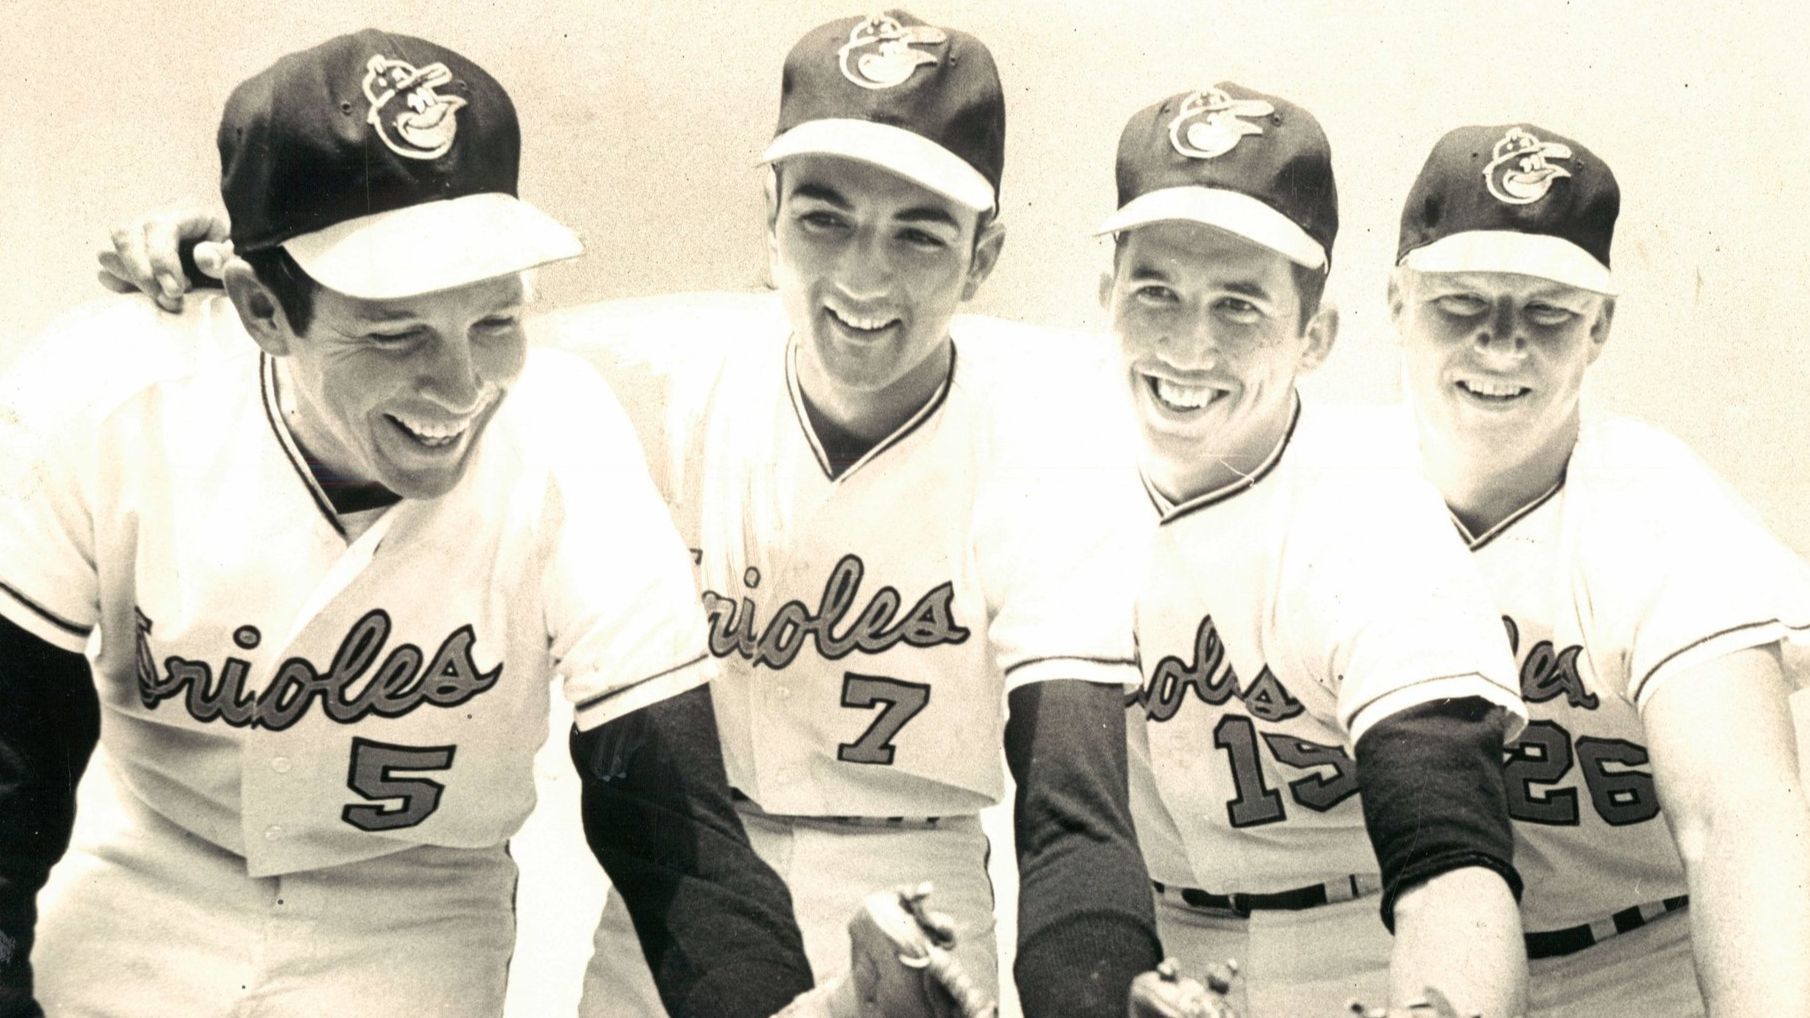 Orioles third baseman Brooks Robinson, shortstop Mark Belanger, second baseman Davey Johnson and first baseman Boog Powell are pictured from left to right April 8, 1969.